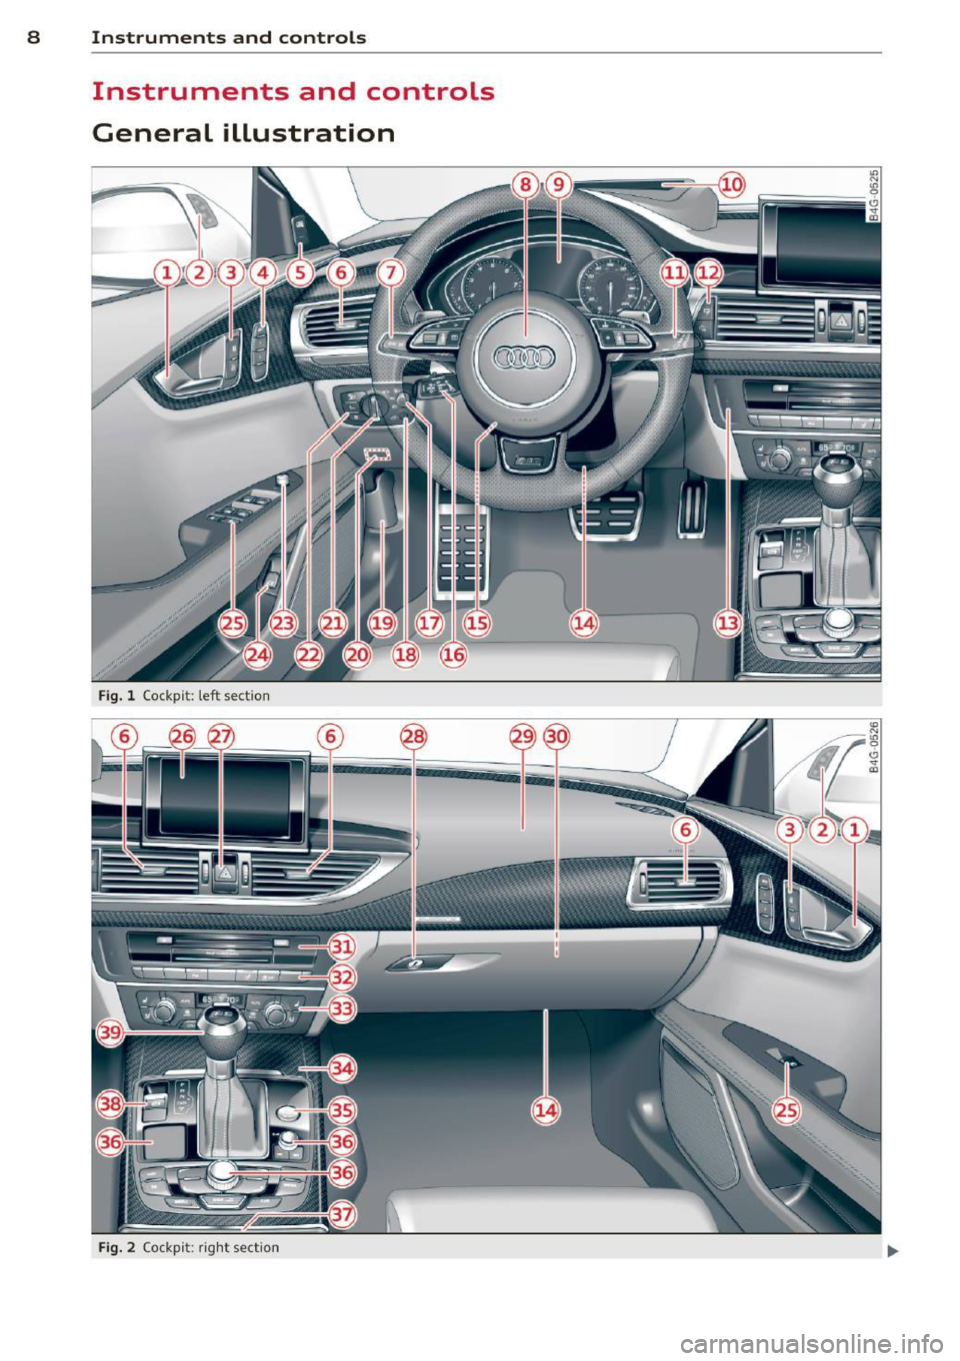 AUDI RS7 SPORTBACK 2015  Owners Manual 8  Instruments and controls 
Instruments  and  controls 
General  illustration 
Fig. l Cockp it:  left  sect io n 
Fig. 2 Cockp it : ri ght  sect io n  